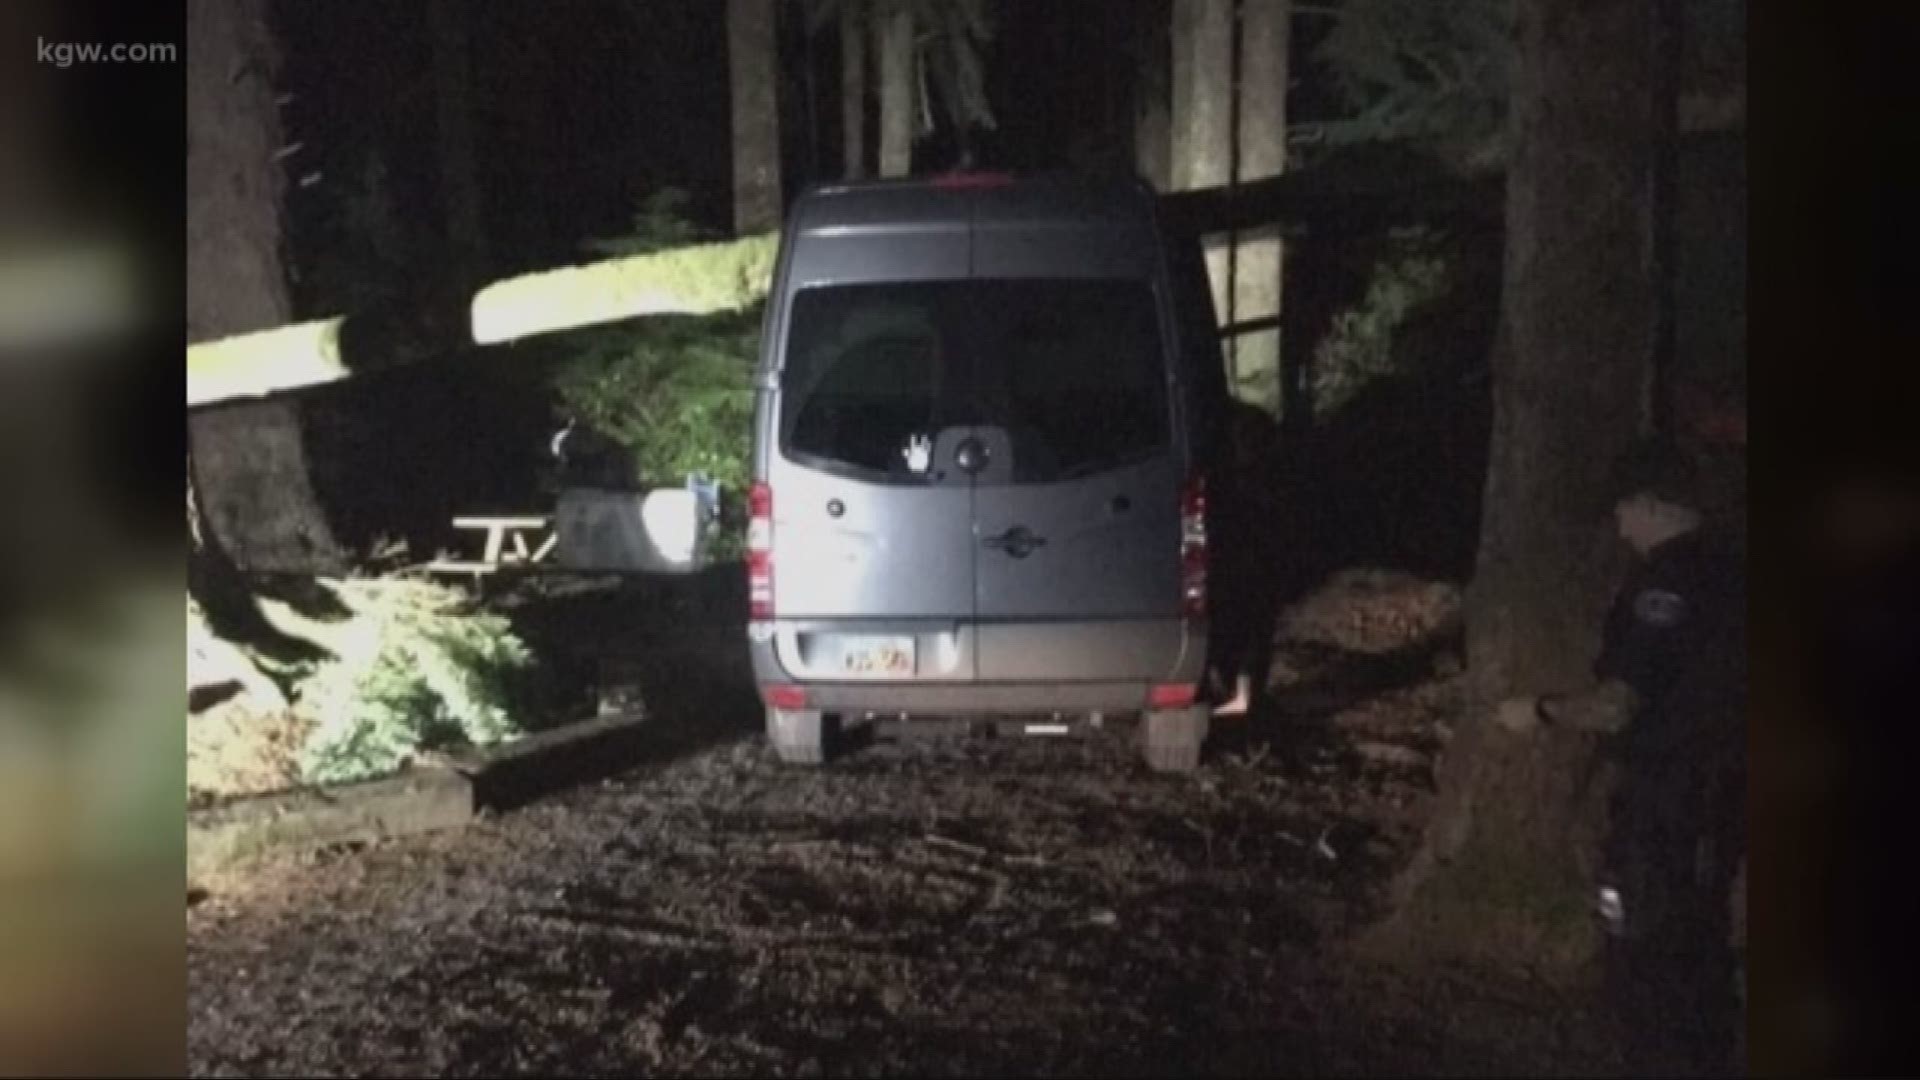 Fortunately, no one was hurt, when a tree came crashing down at Wright's Campground in Cannon Beach. The tree fell onto a family's van. The family was visiting from Salt Lake City, Utah.